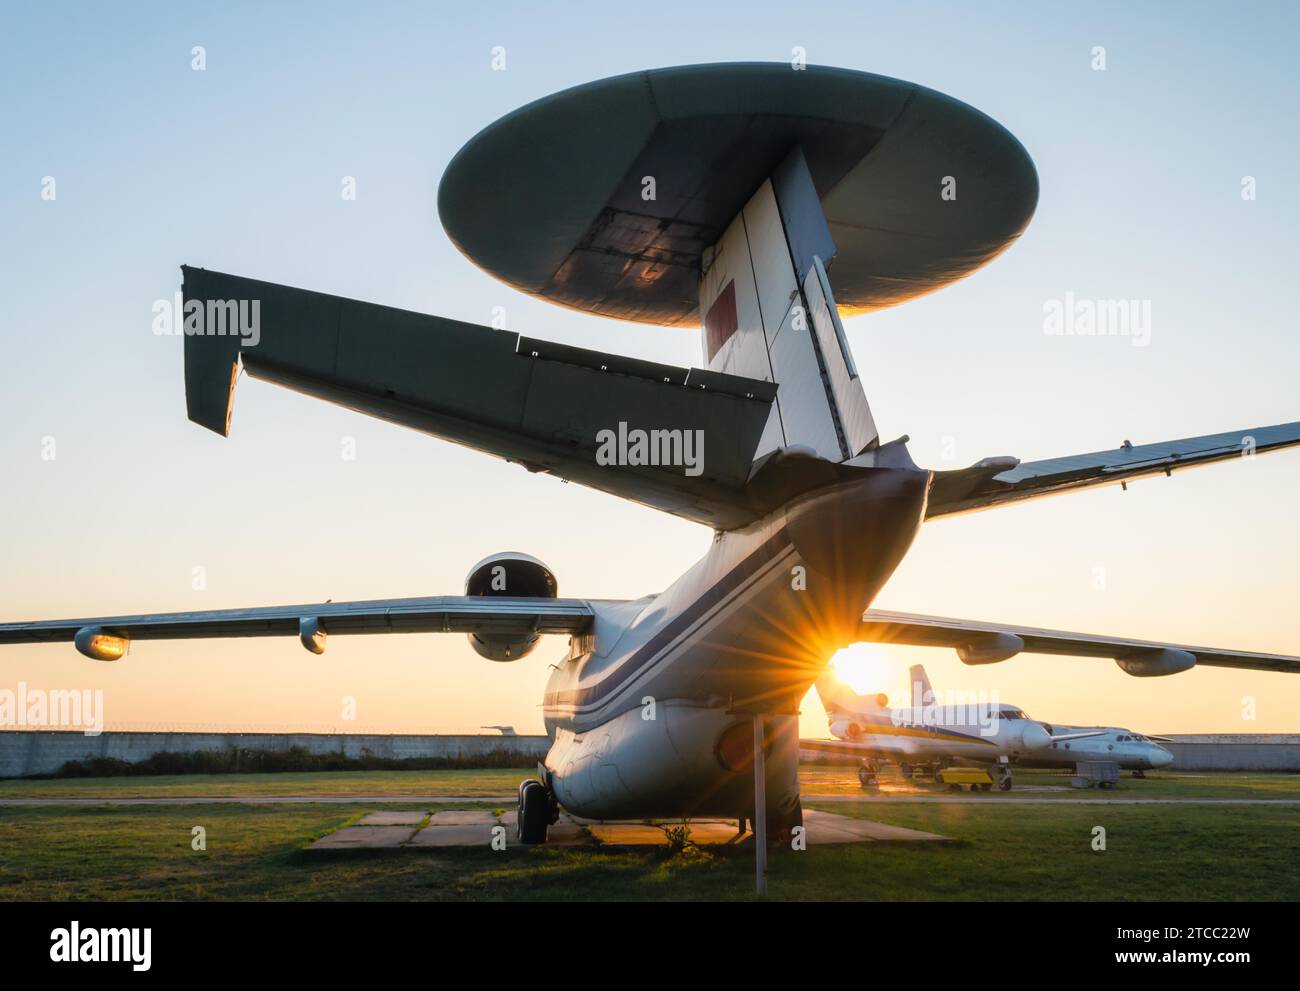 Old soviet reconnaissance aircraft at the airport with the rays of the evening sun Stock Photo